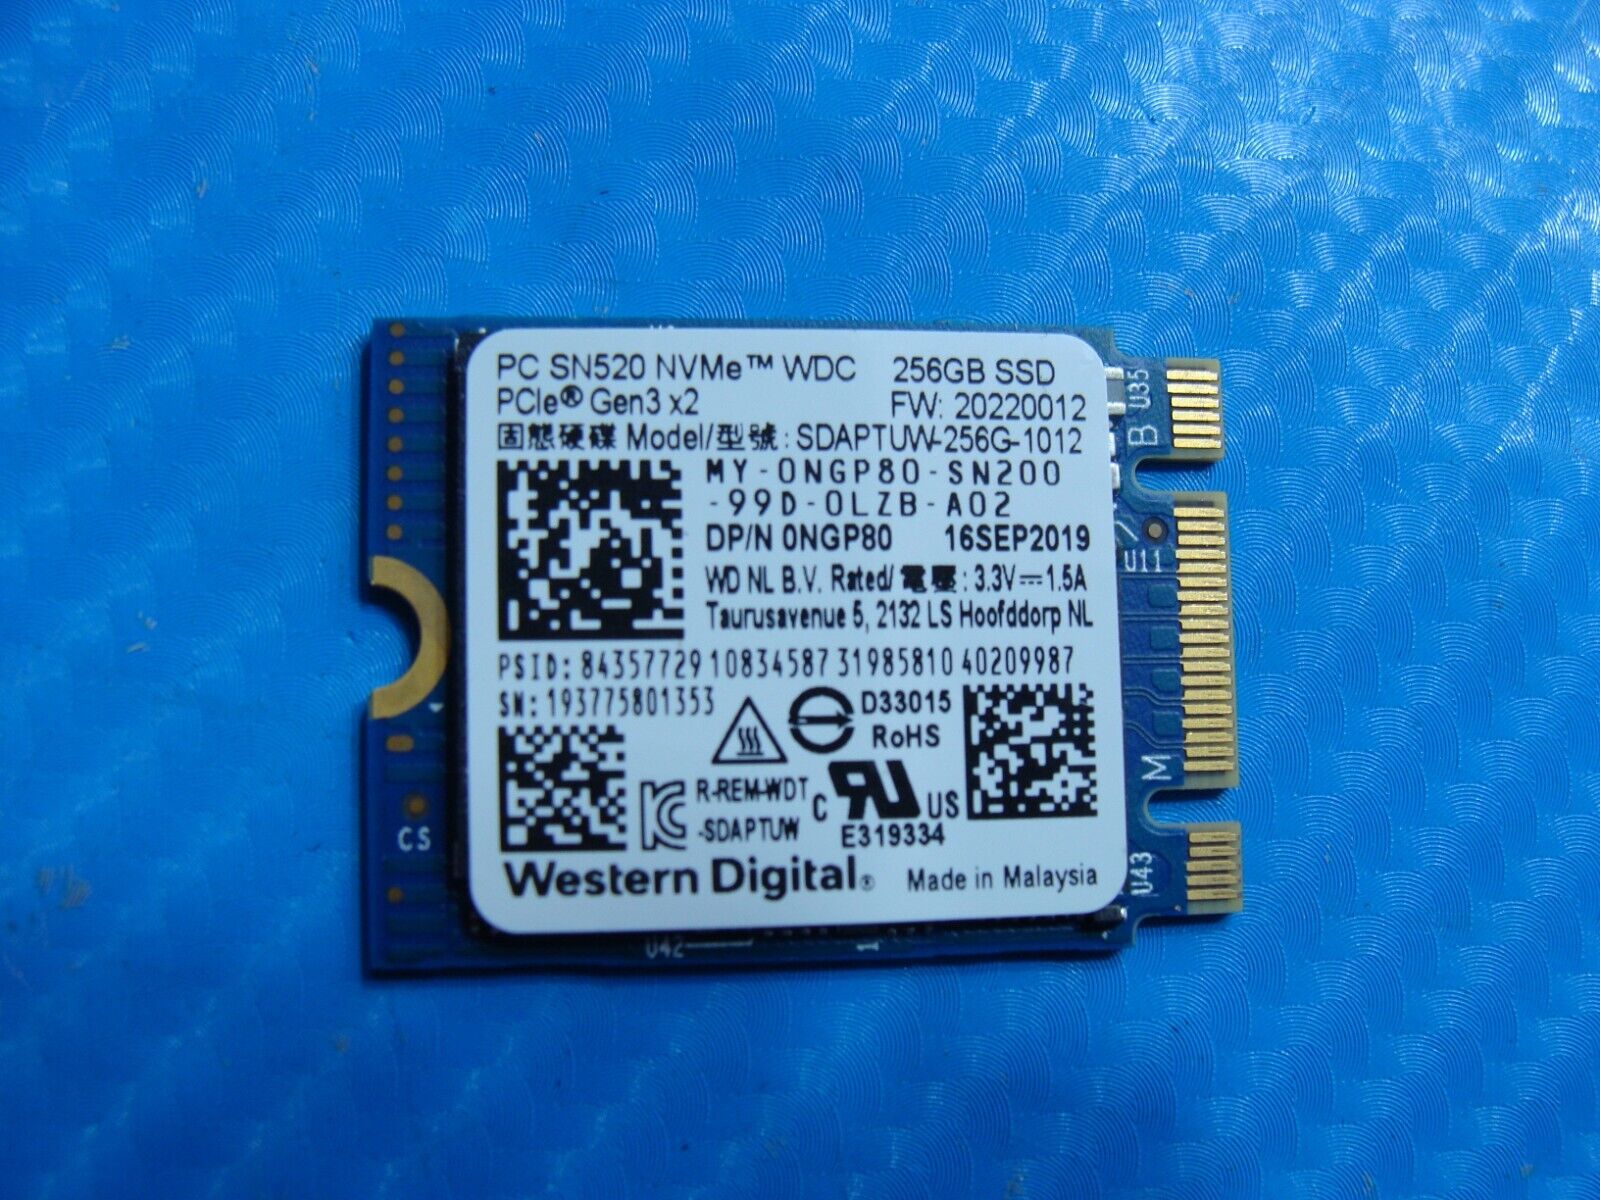 Dell 3540 WD 256GB SATA M.2 SSD Solid State Drive SDAPTUW-256G-1012 NGP80